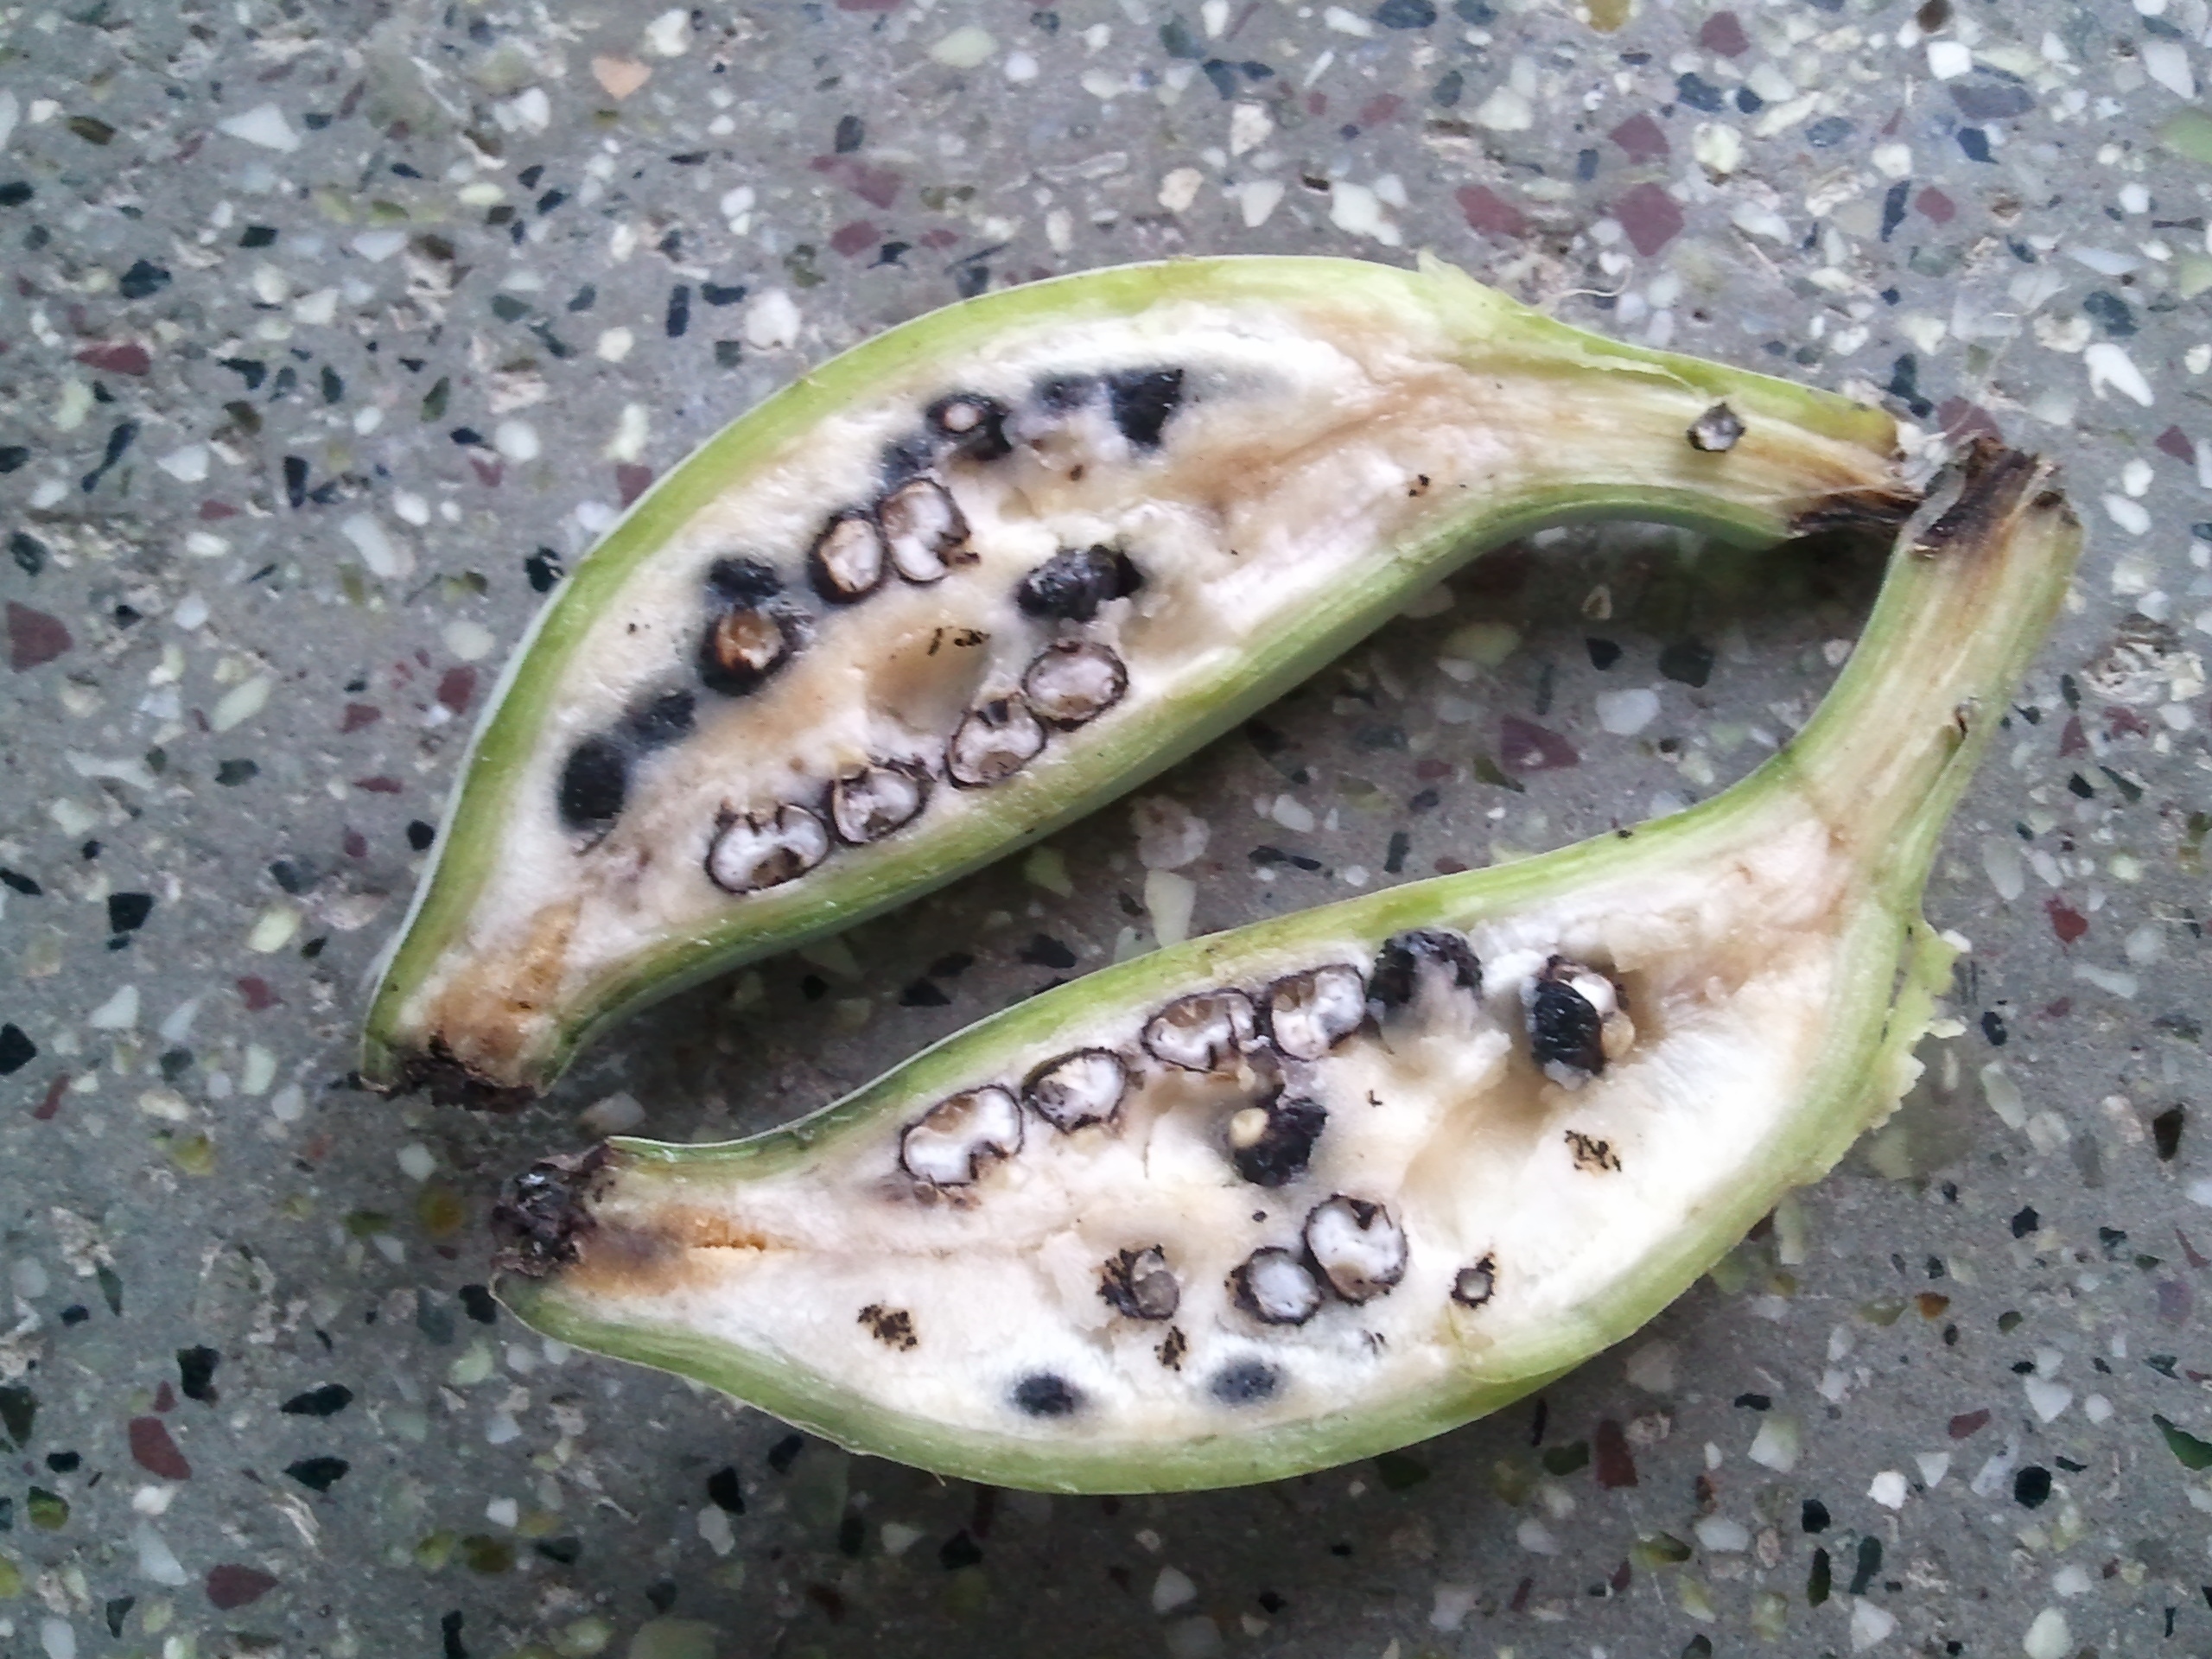 Banana cut in half to show the large black seeds inside